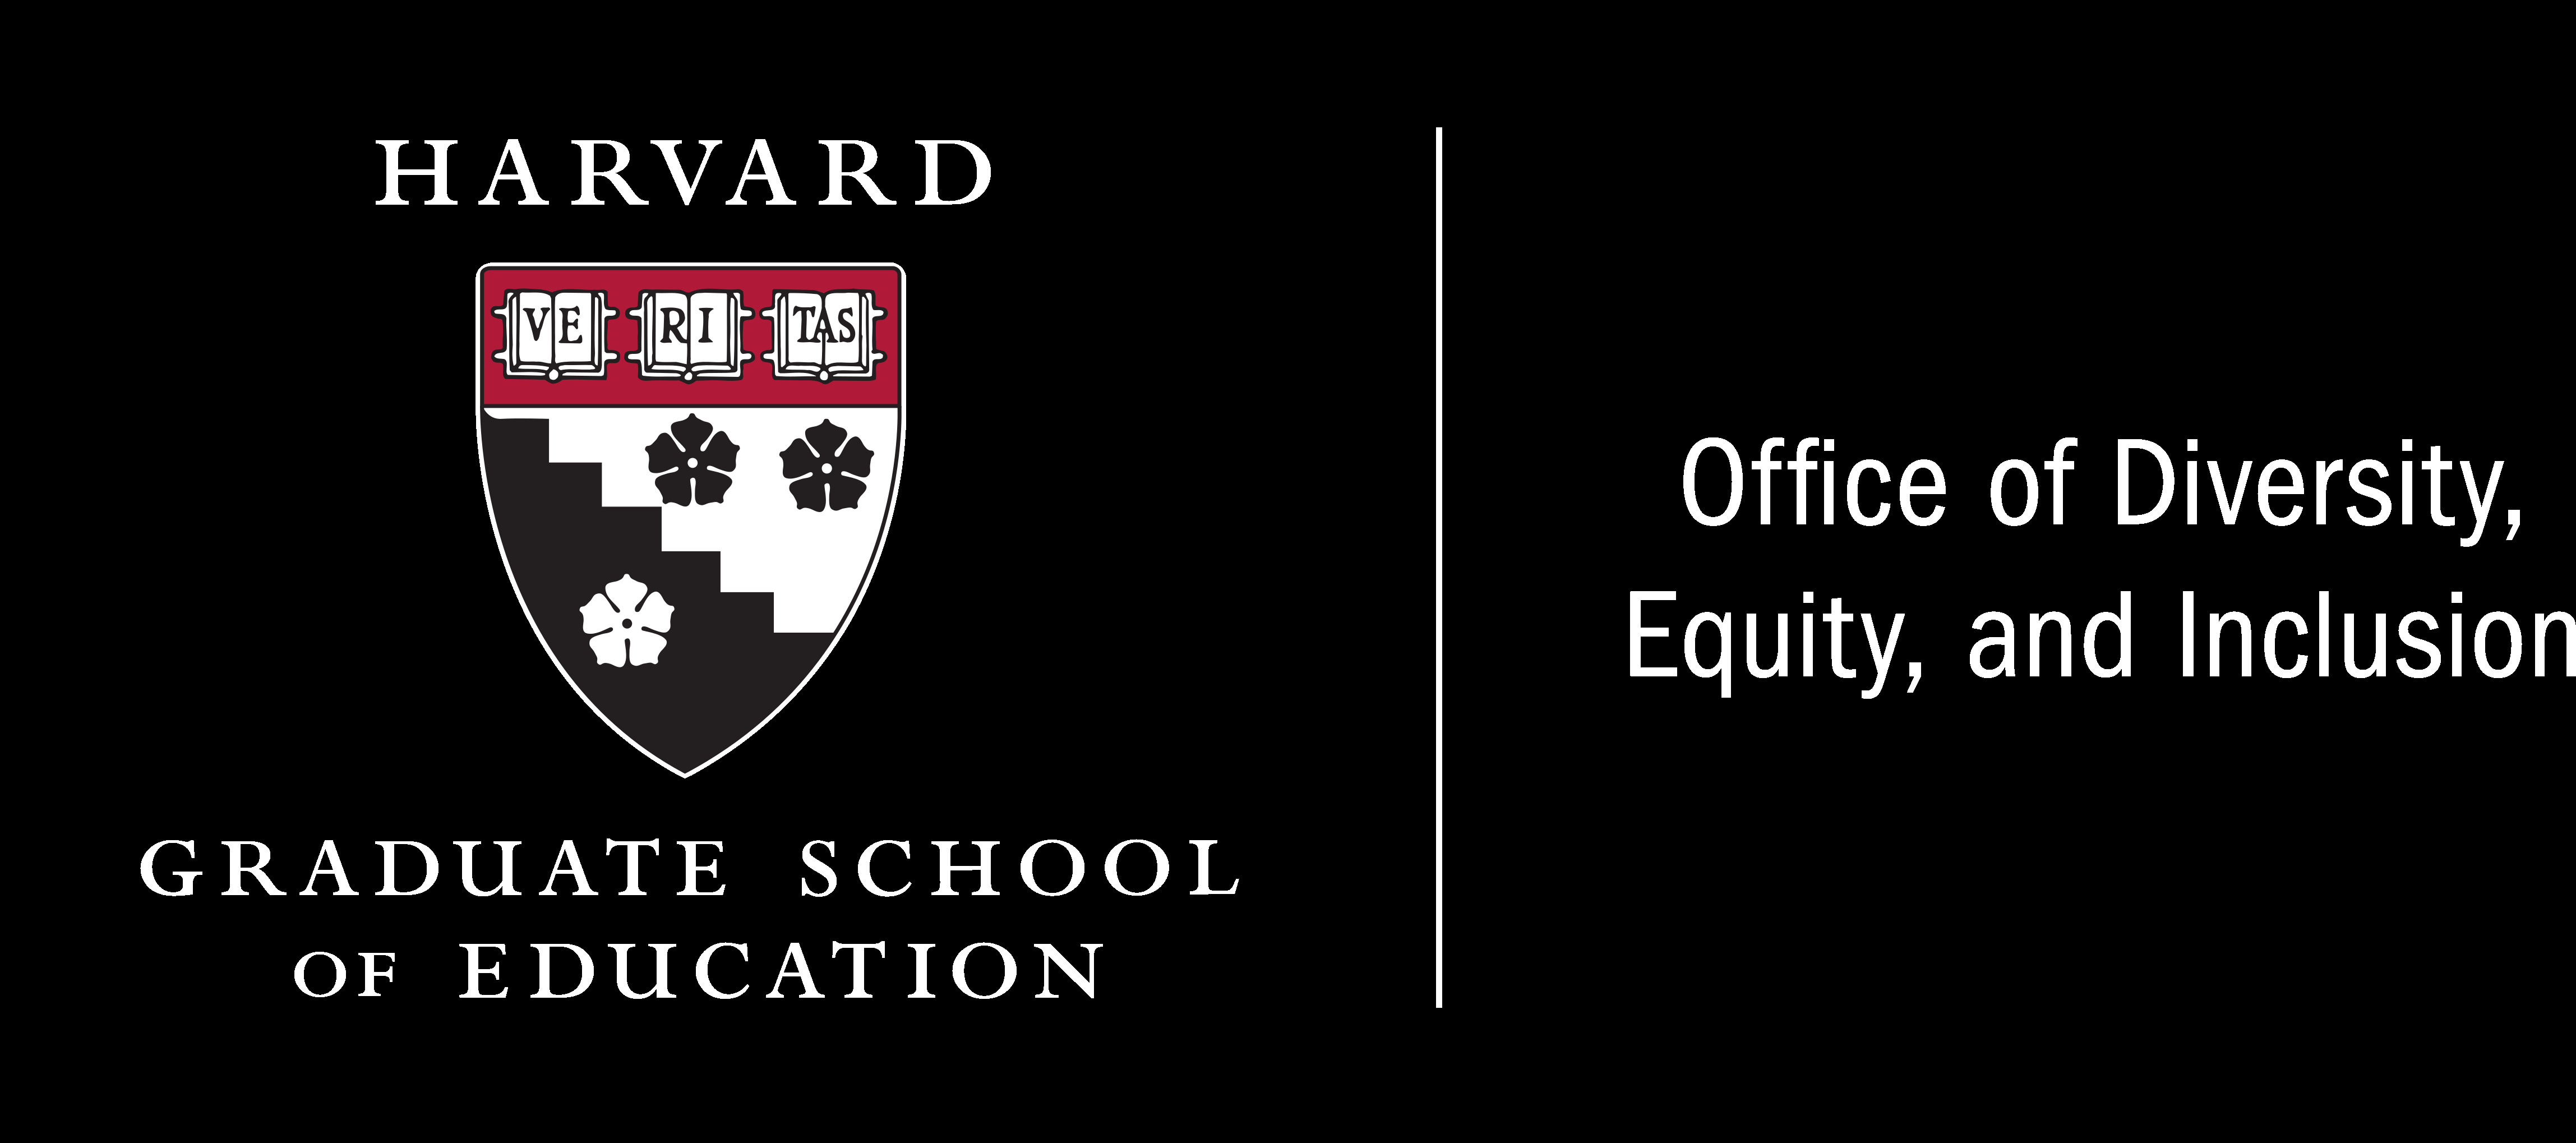 Harvard Graduate School of Education Office of Diversity, Equity, and Inclusion